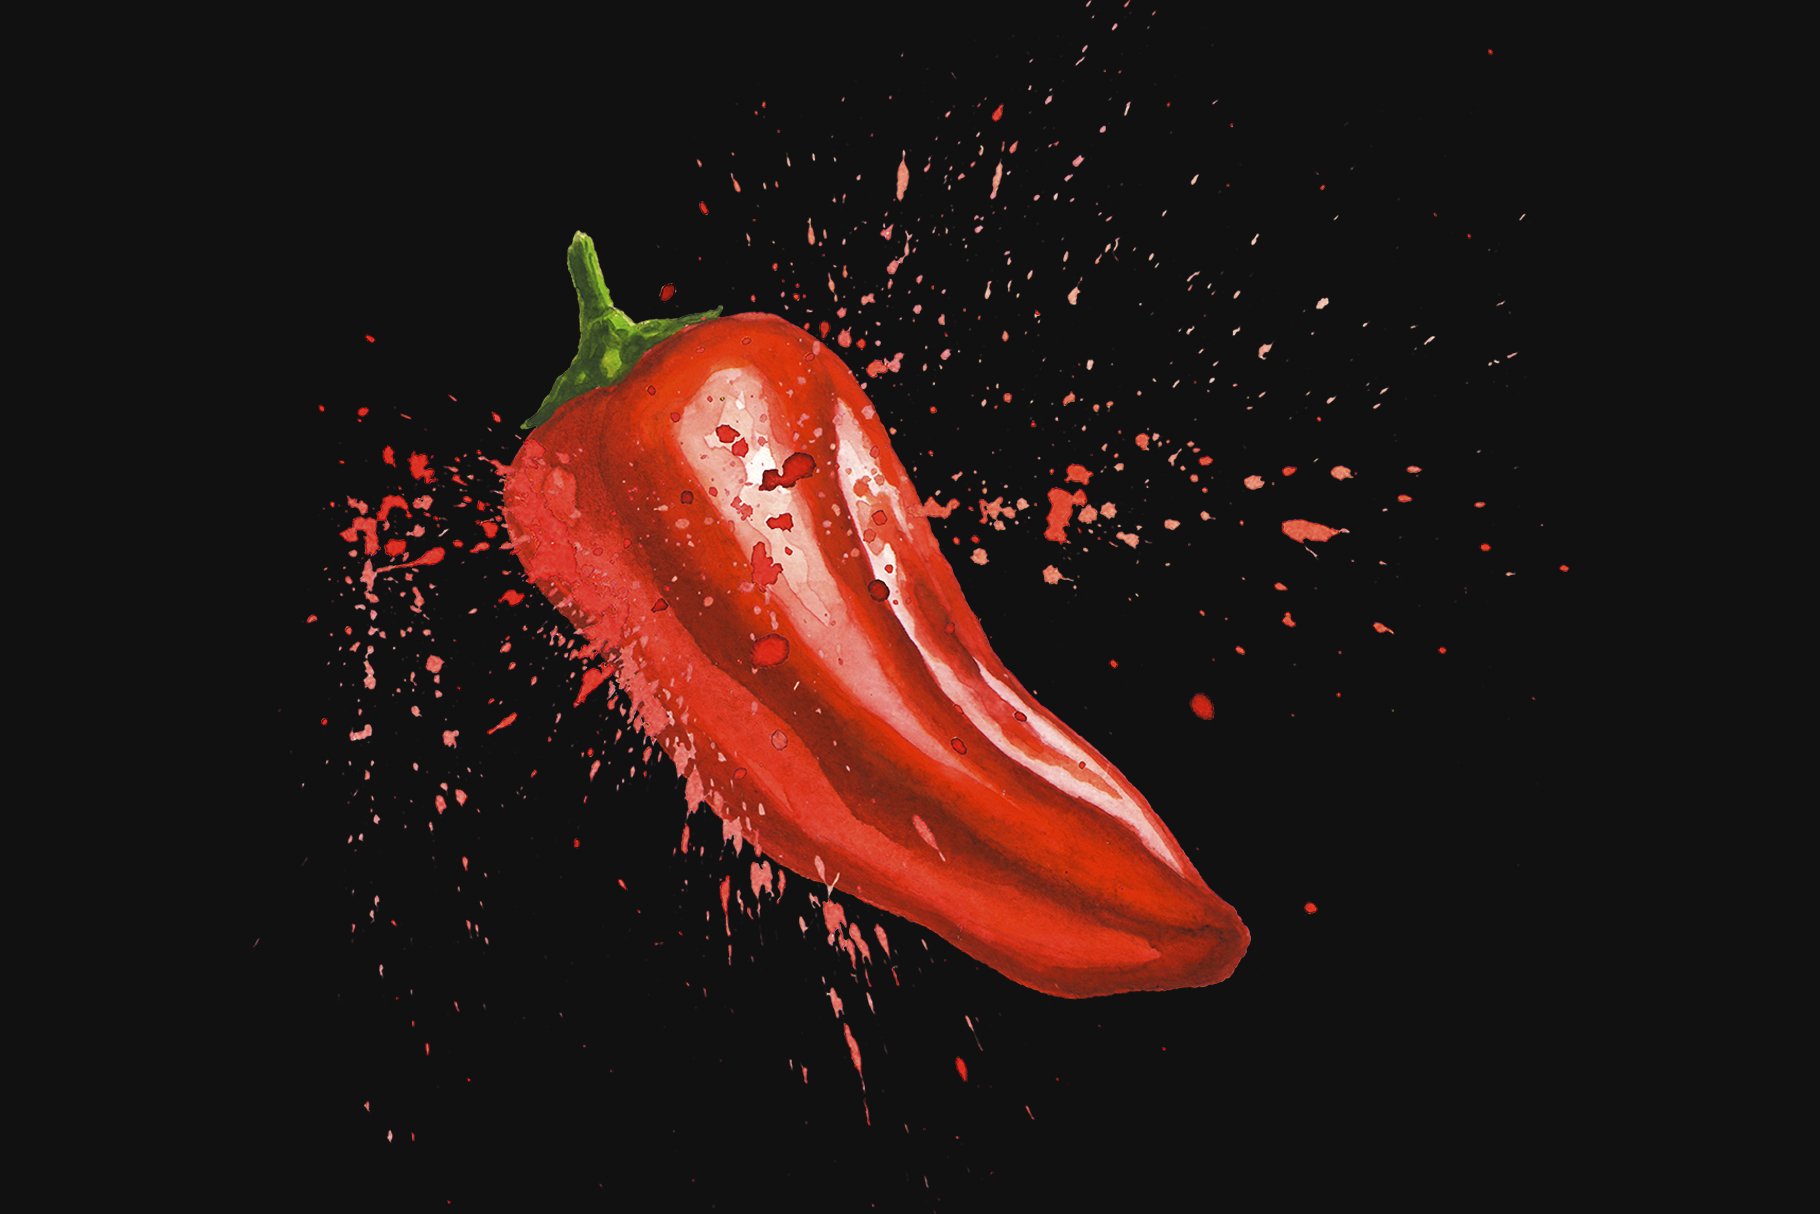 Art illustration with red pepper.